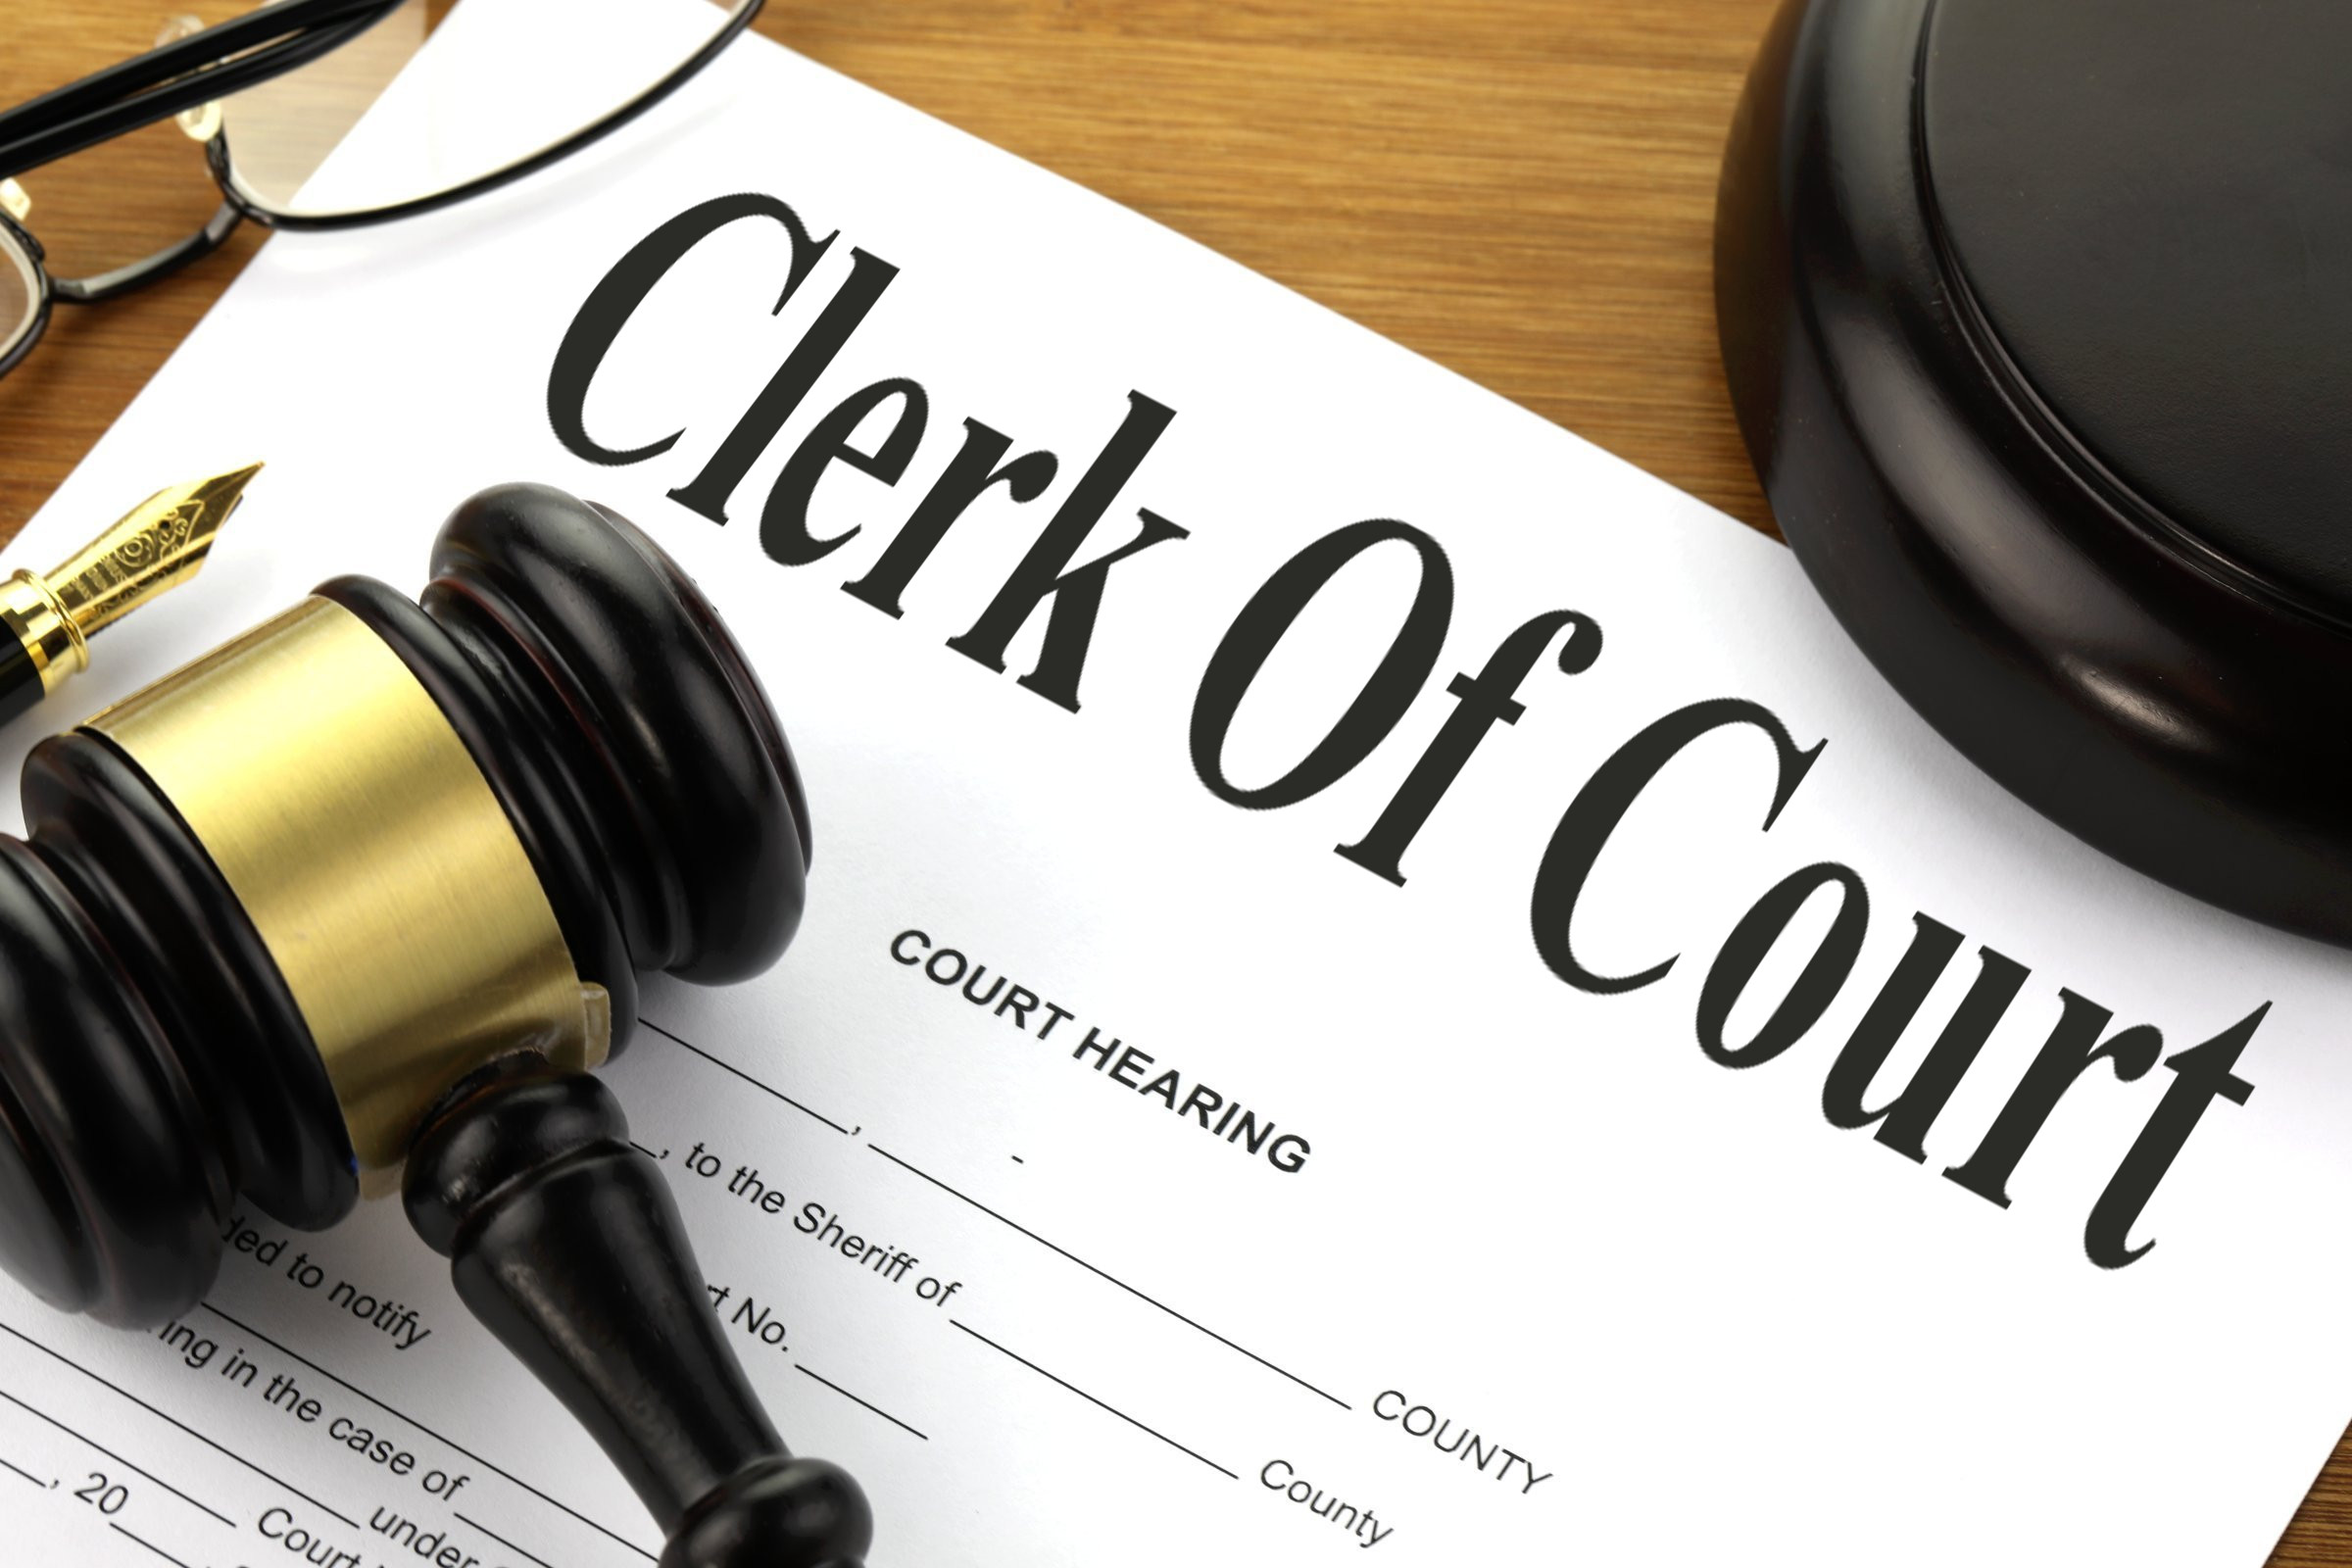 Clerk Of Court Free of Charge Creative Commons Legal 1 image